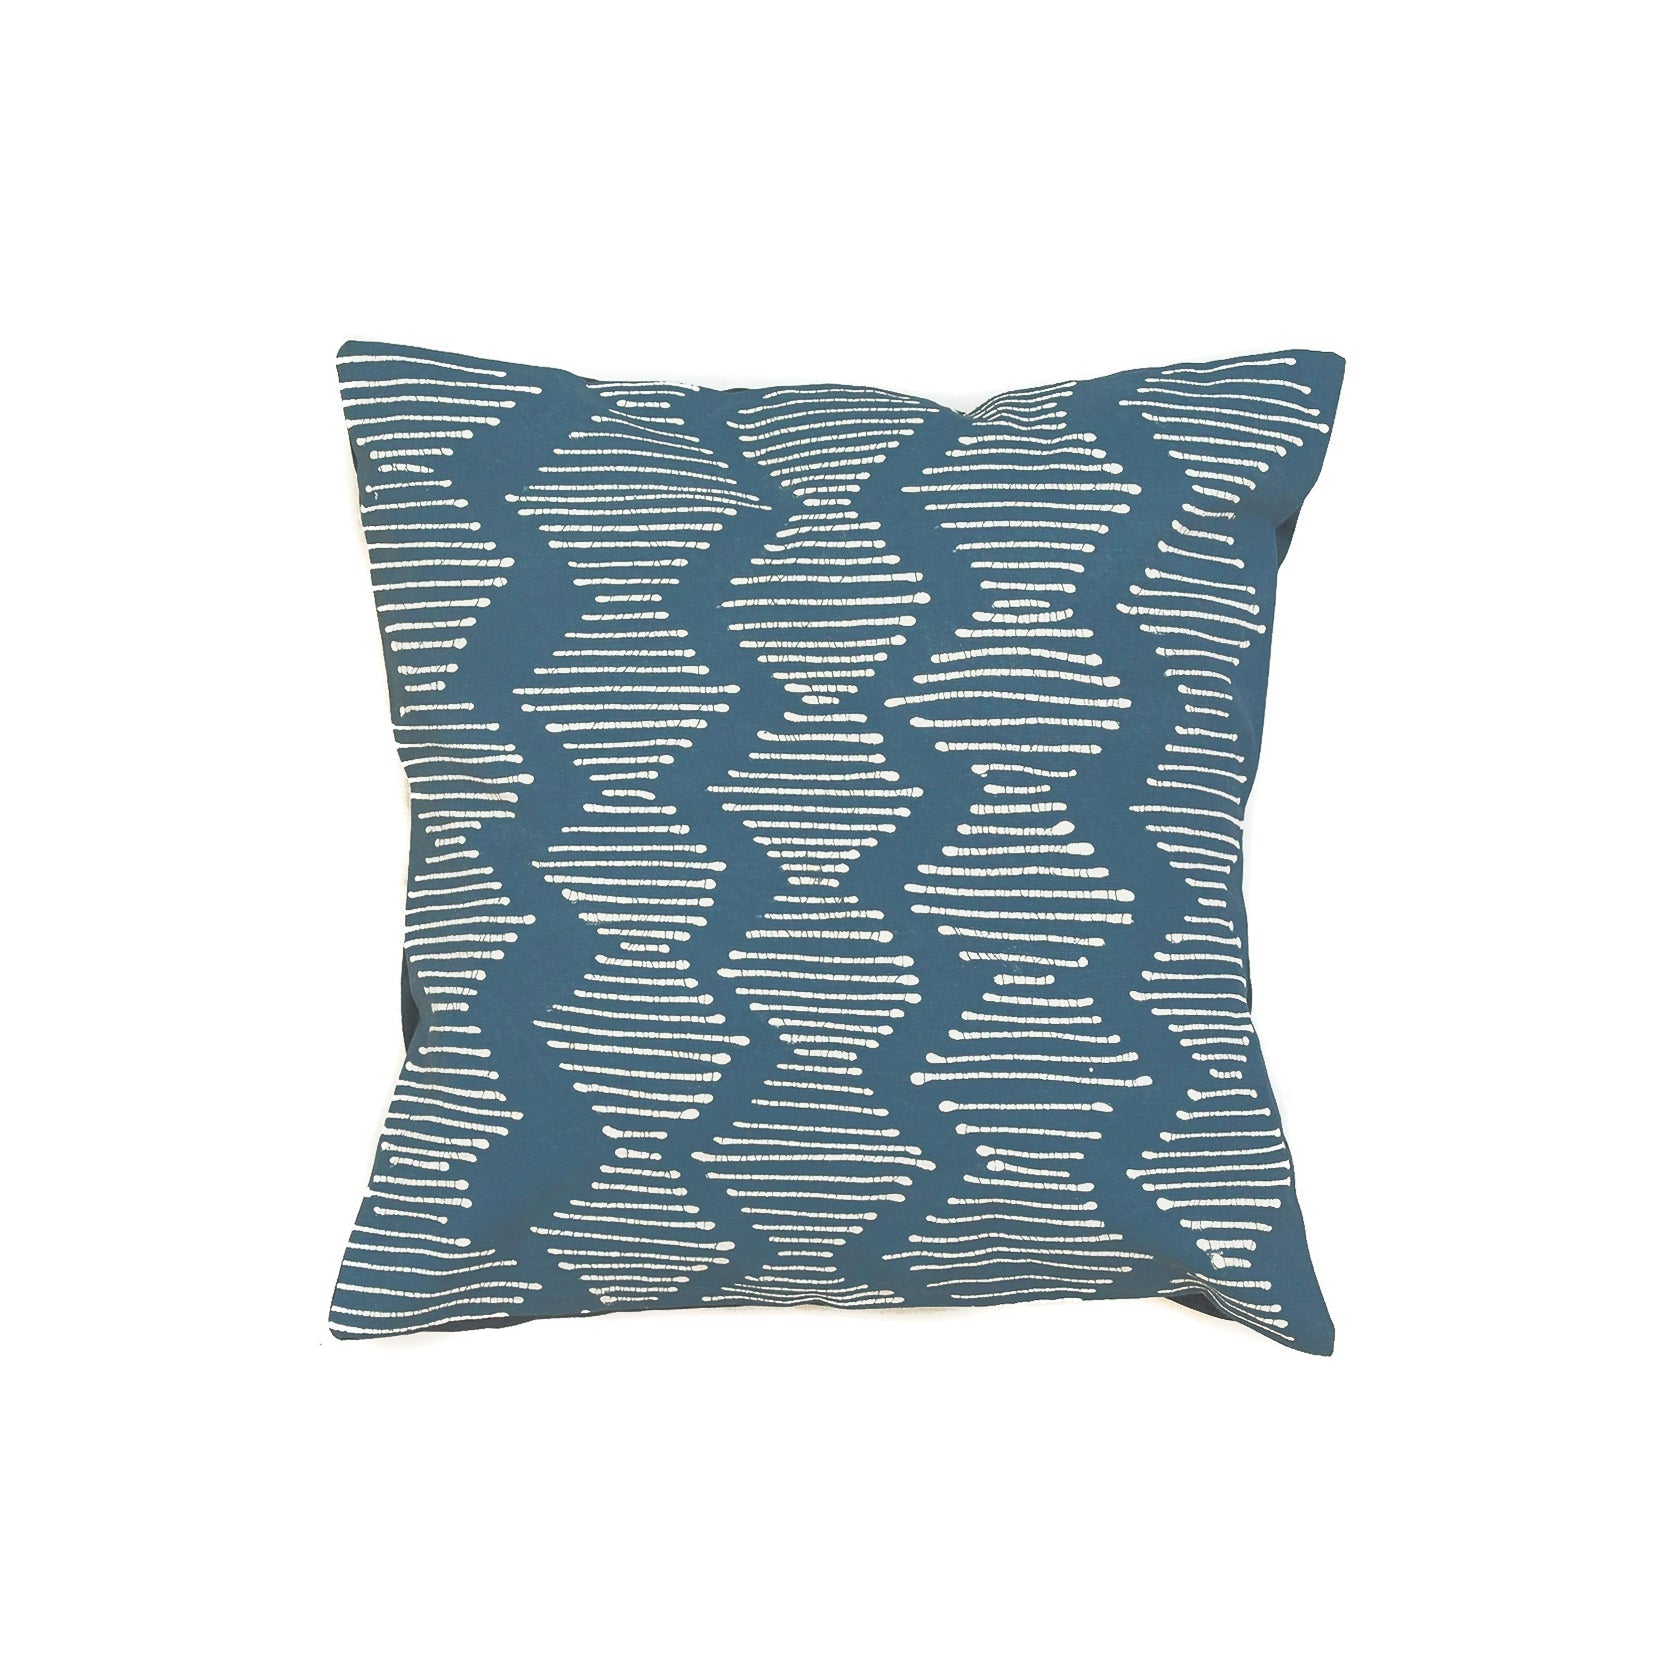 Tribal Cloth Indigo Line Wave Cushion Cover - Handmade by TRIBAL TEXTILES - Handcrafted Home Decor Interiors - African Made